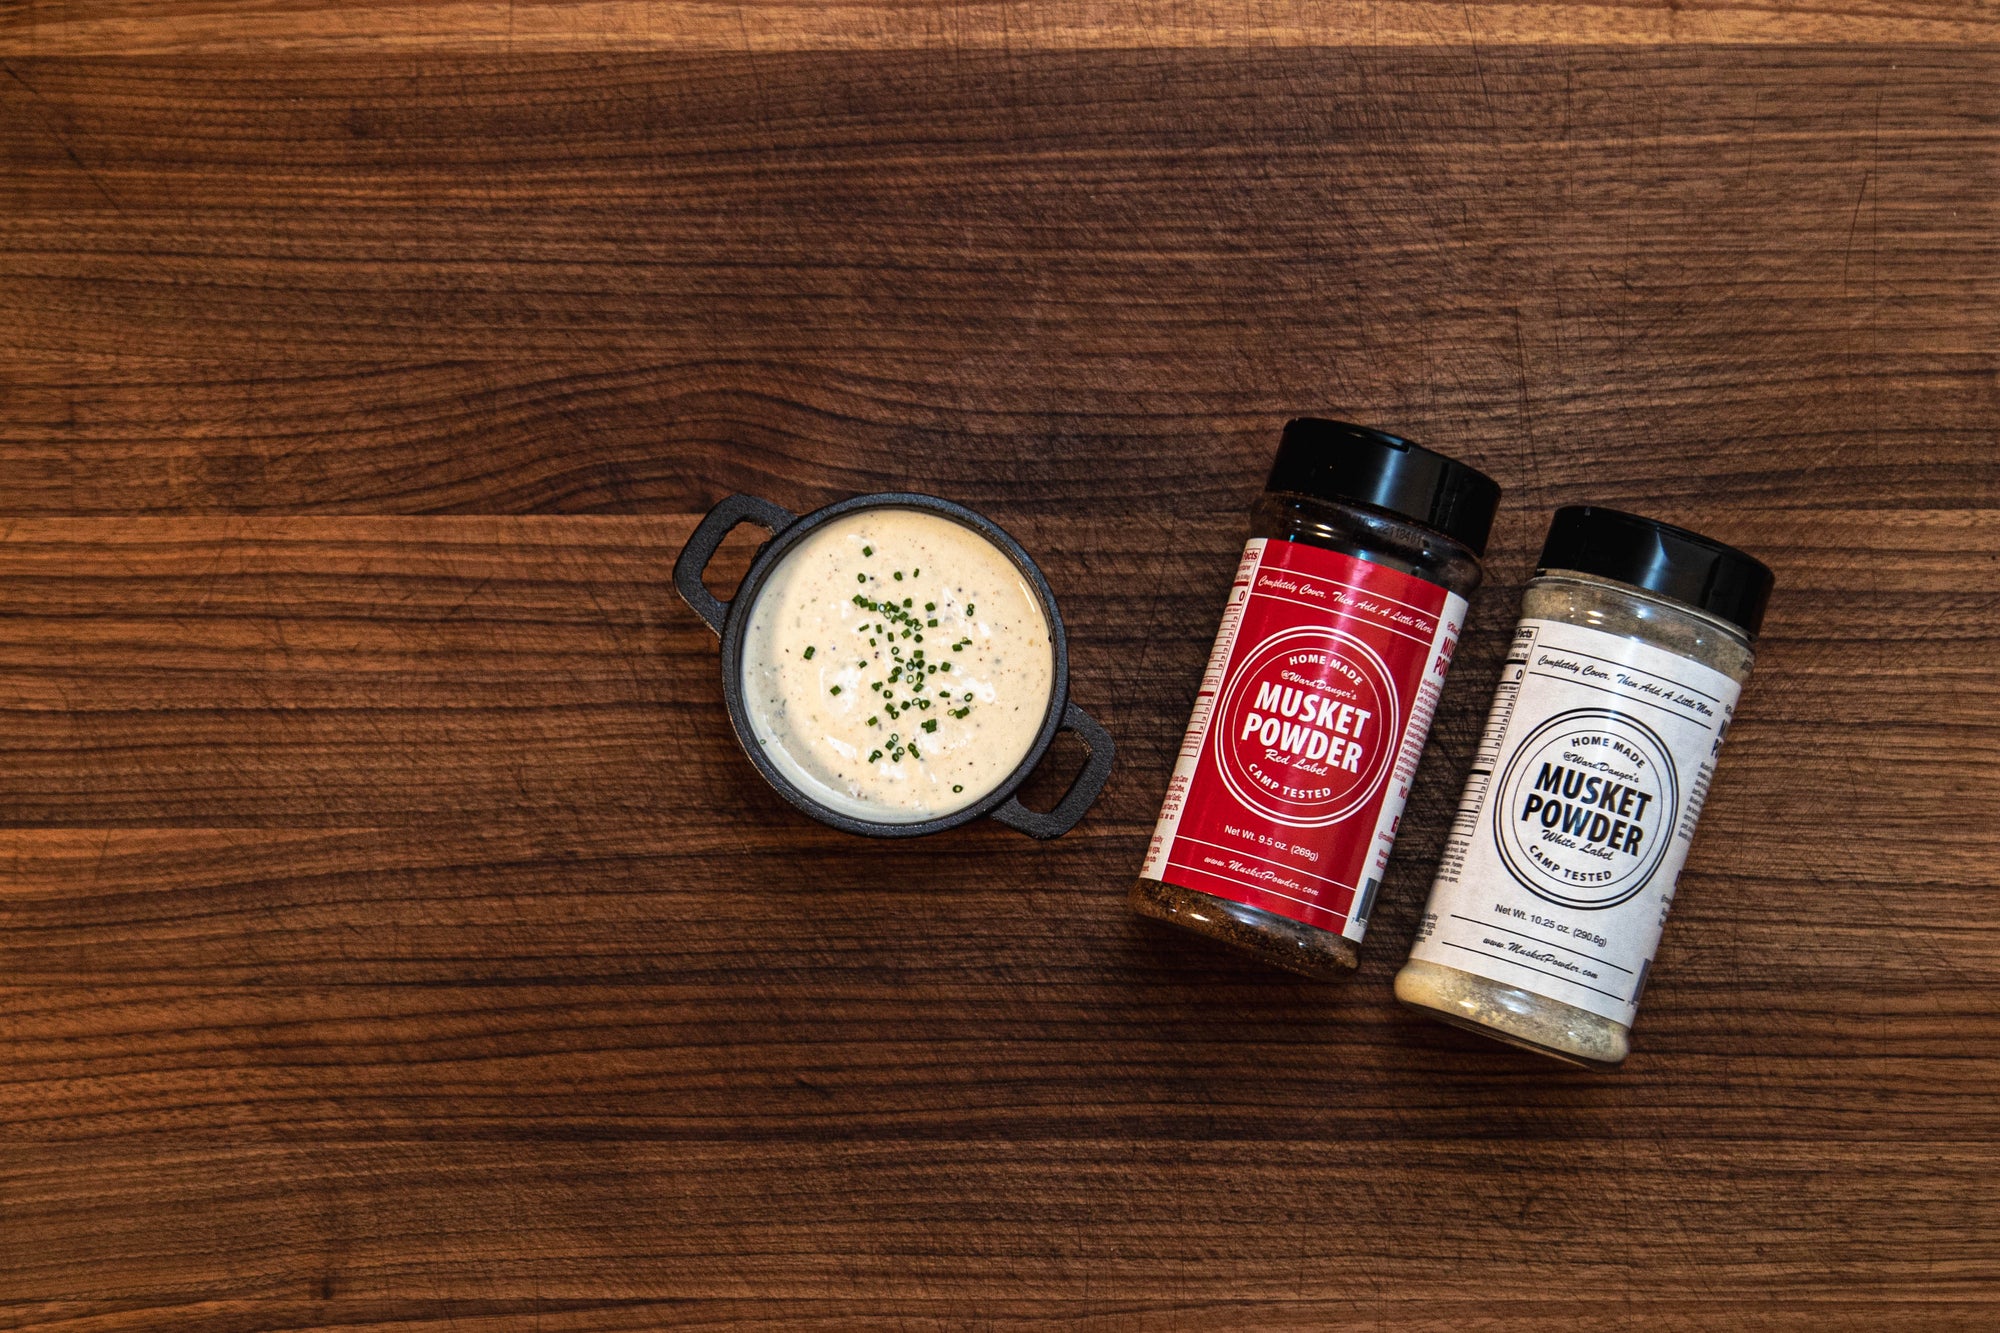 Alabama White Sauce with Red Label and White Label Musket Powder